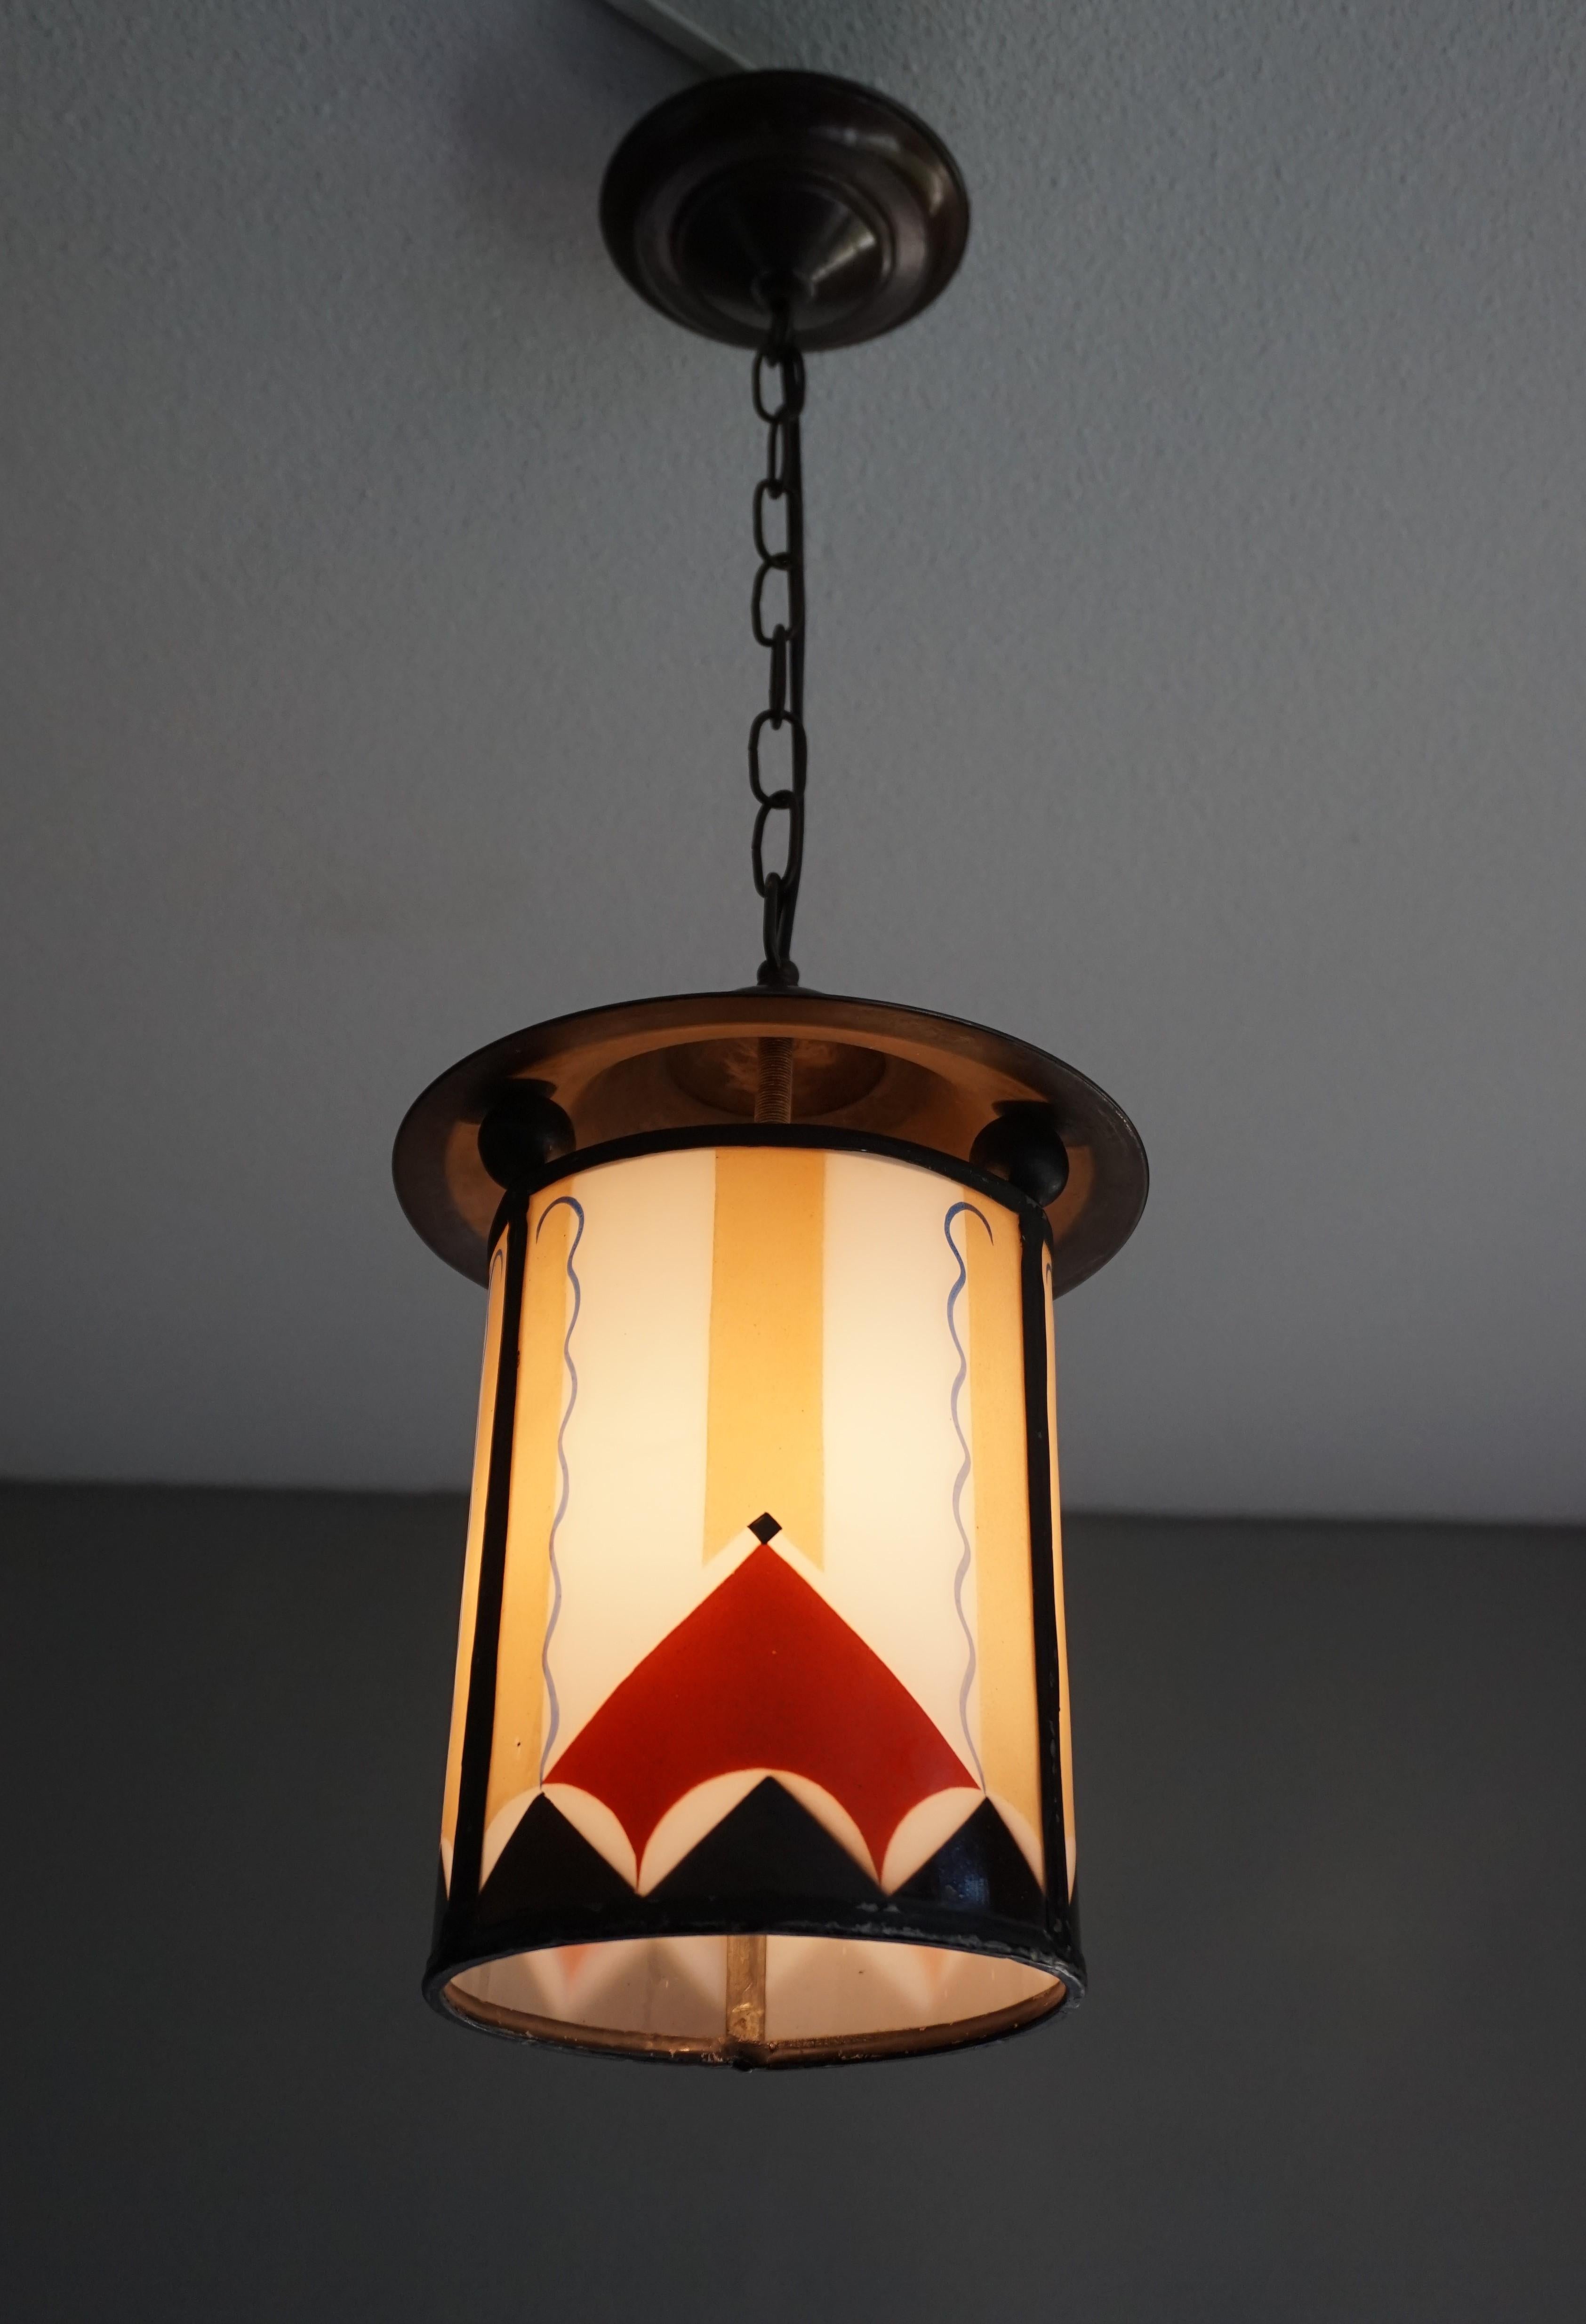 Handcrafted lantern-like pendant from the early 1900s.

This rare and highly stylish fixture was made in early 20th century Amsterdam. The colors of the hand and spray painted geometrical patterns on the rounded, milky glass panels make this work of